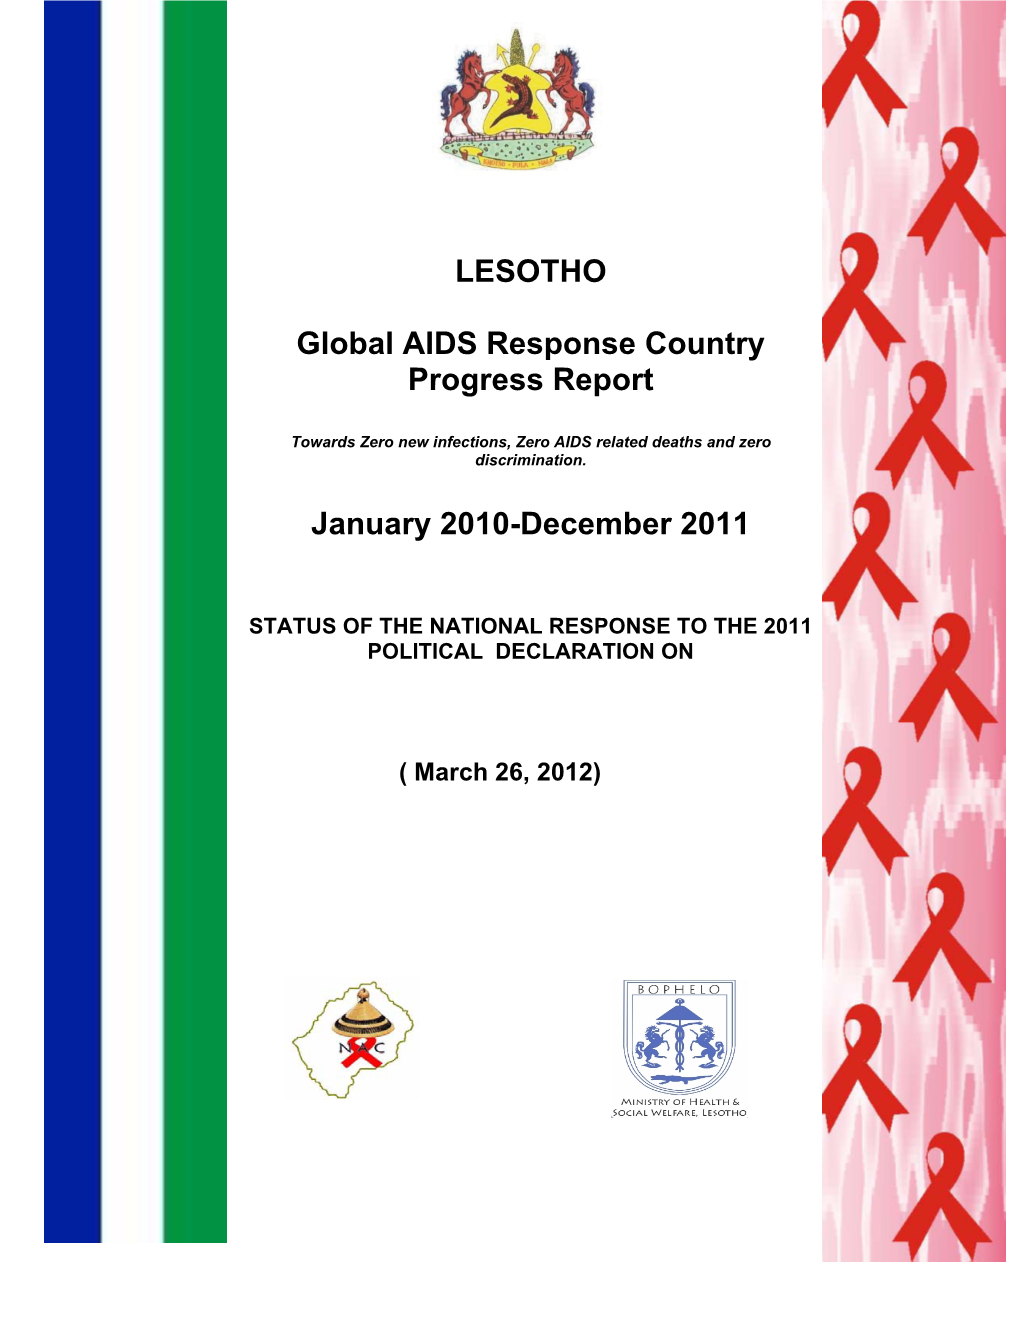 LESOTHO Global AIDS Response Country Progress Report January